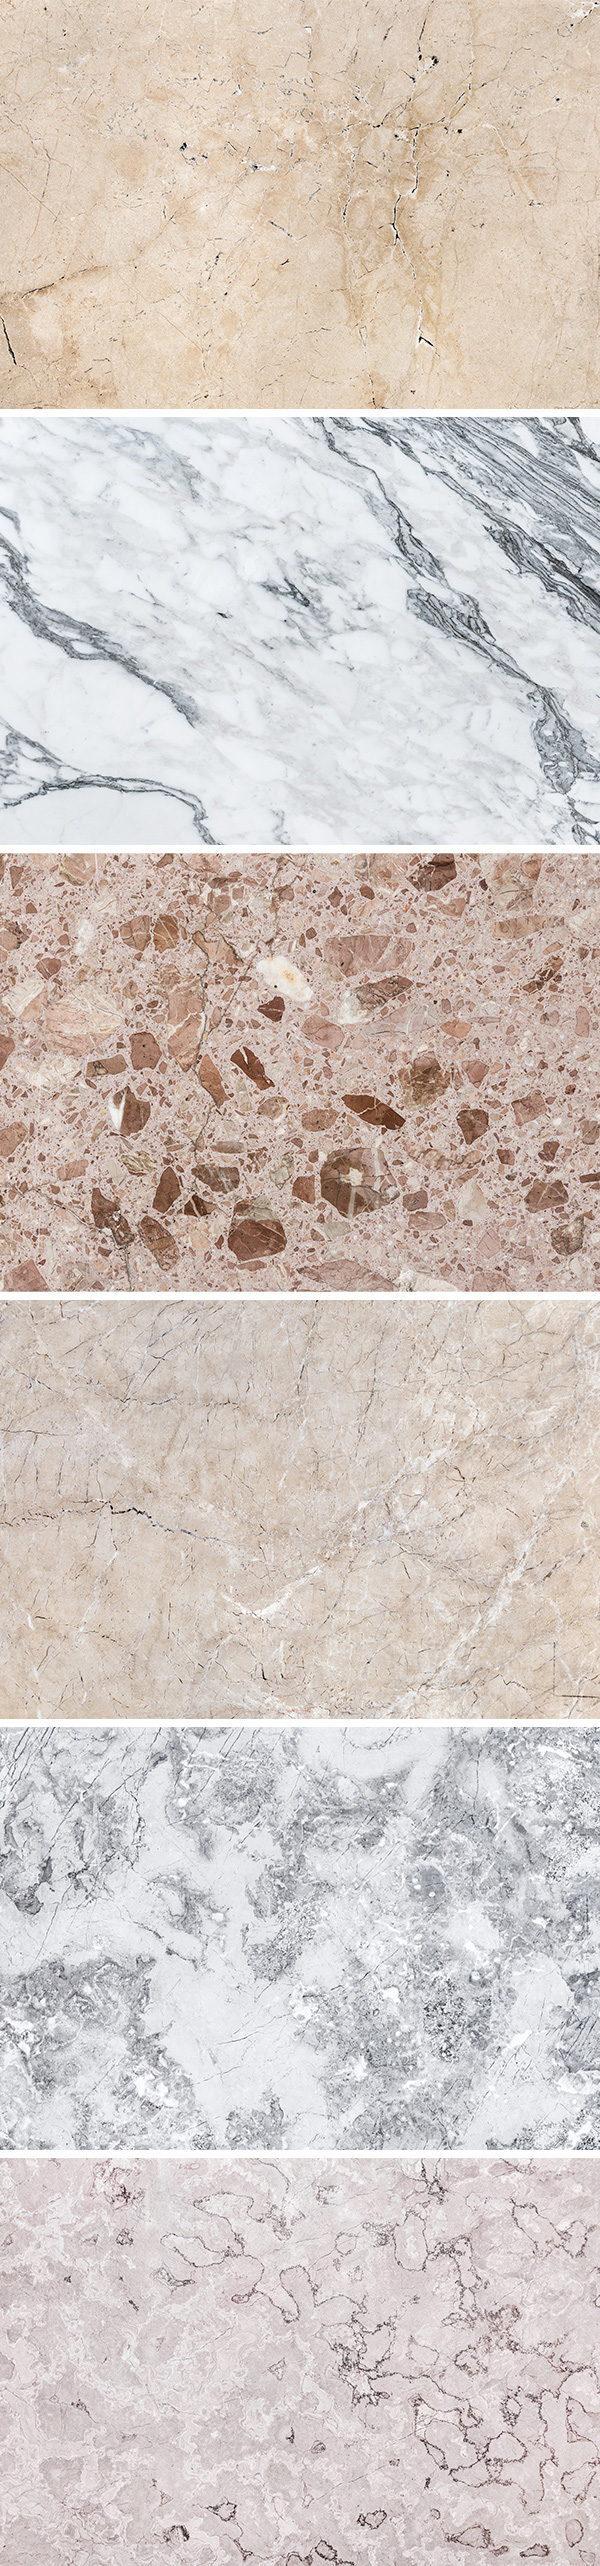 6 Marble Textures Vol.3